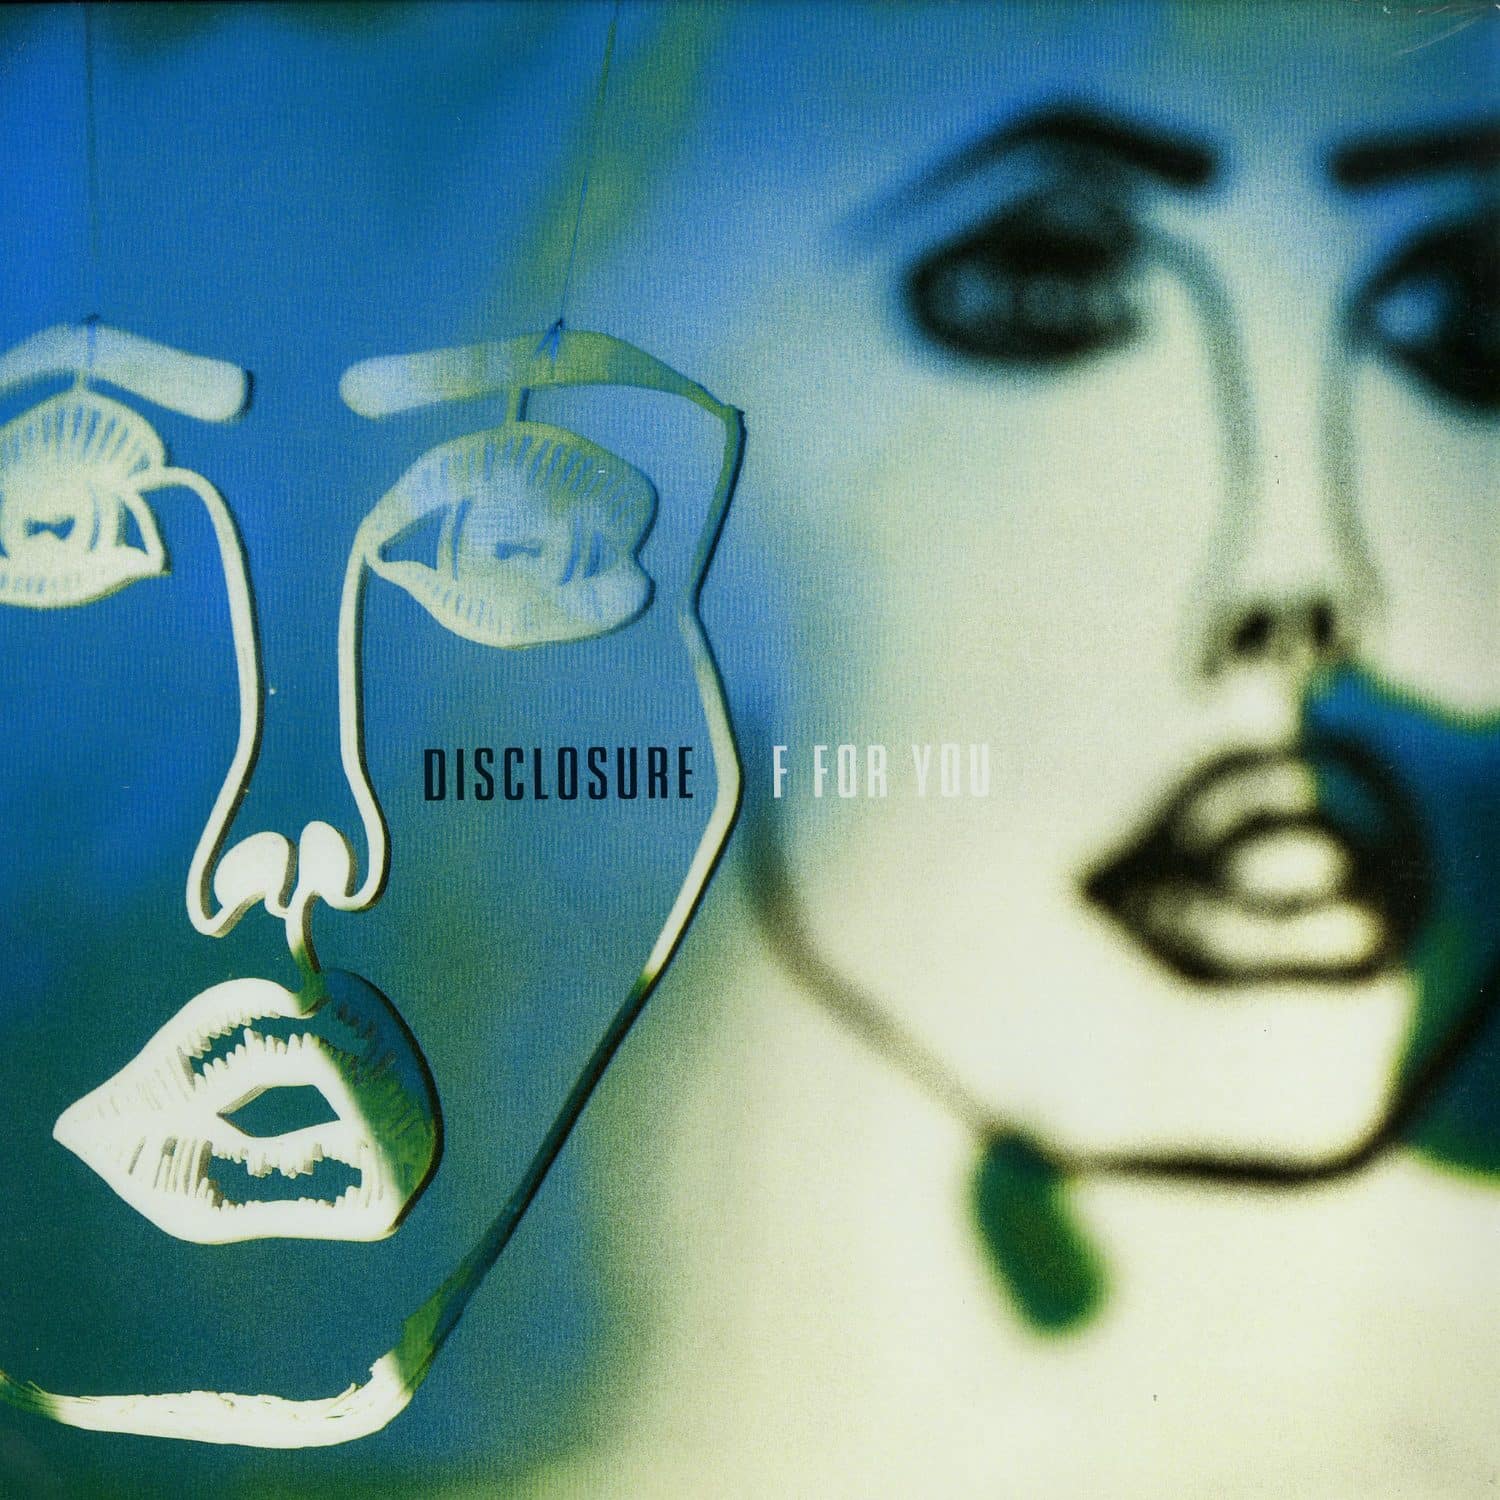 Disclosure - F FOR YOU